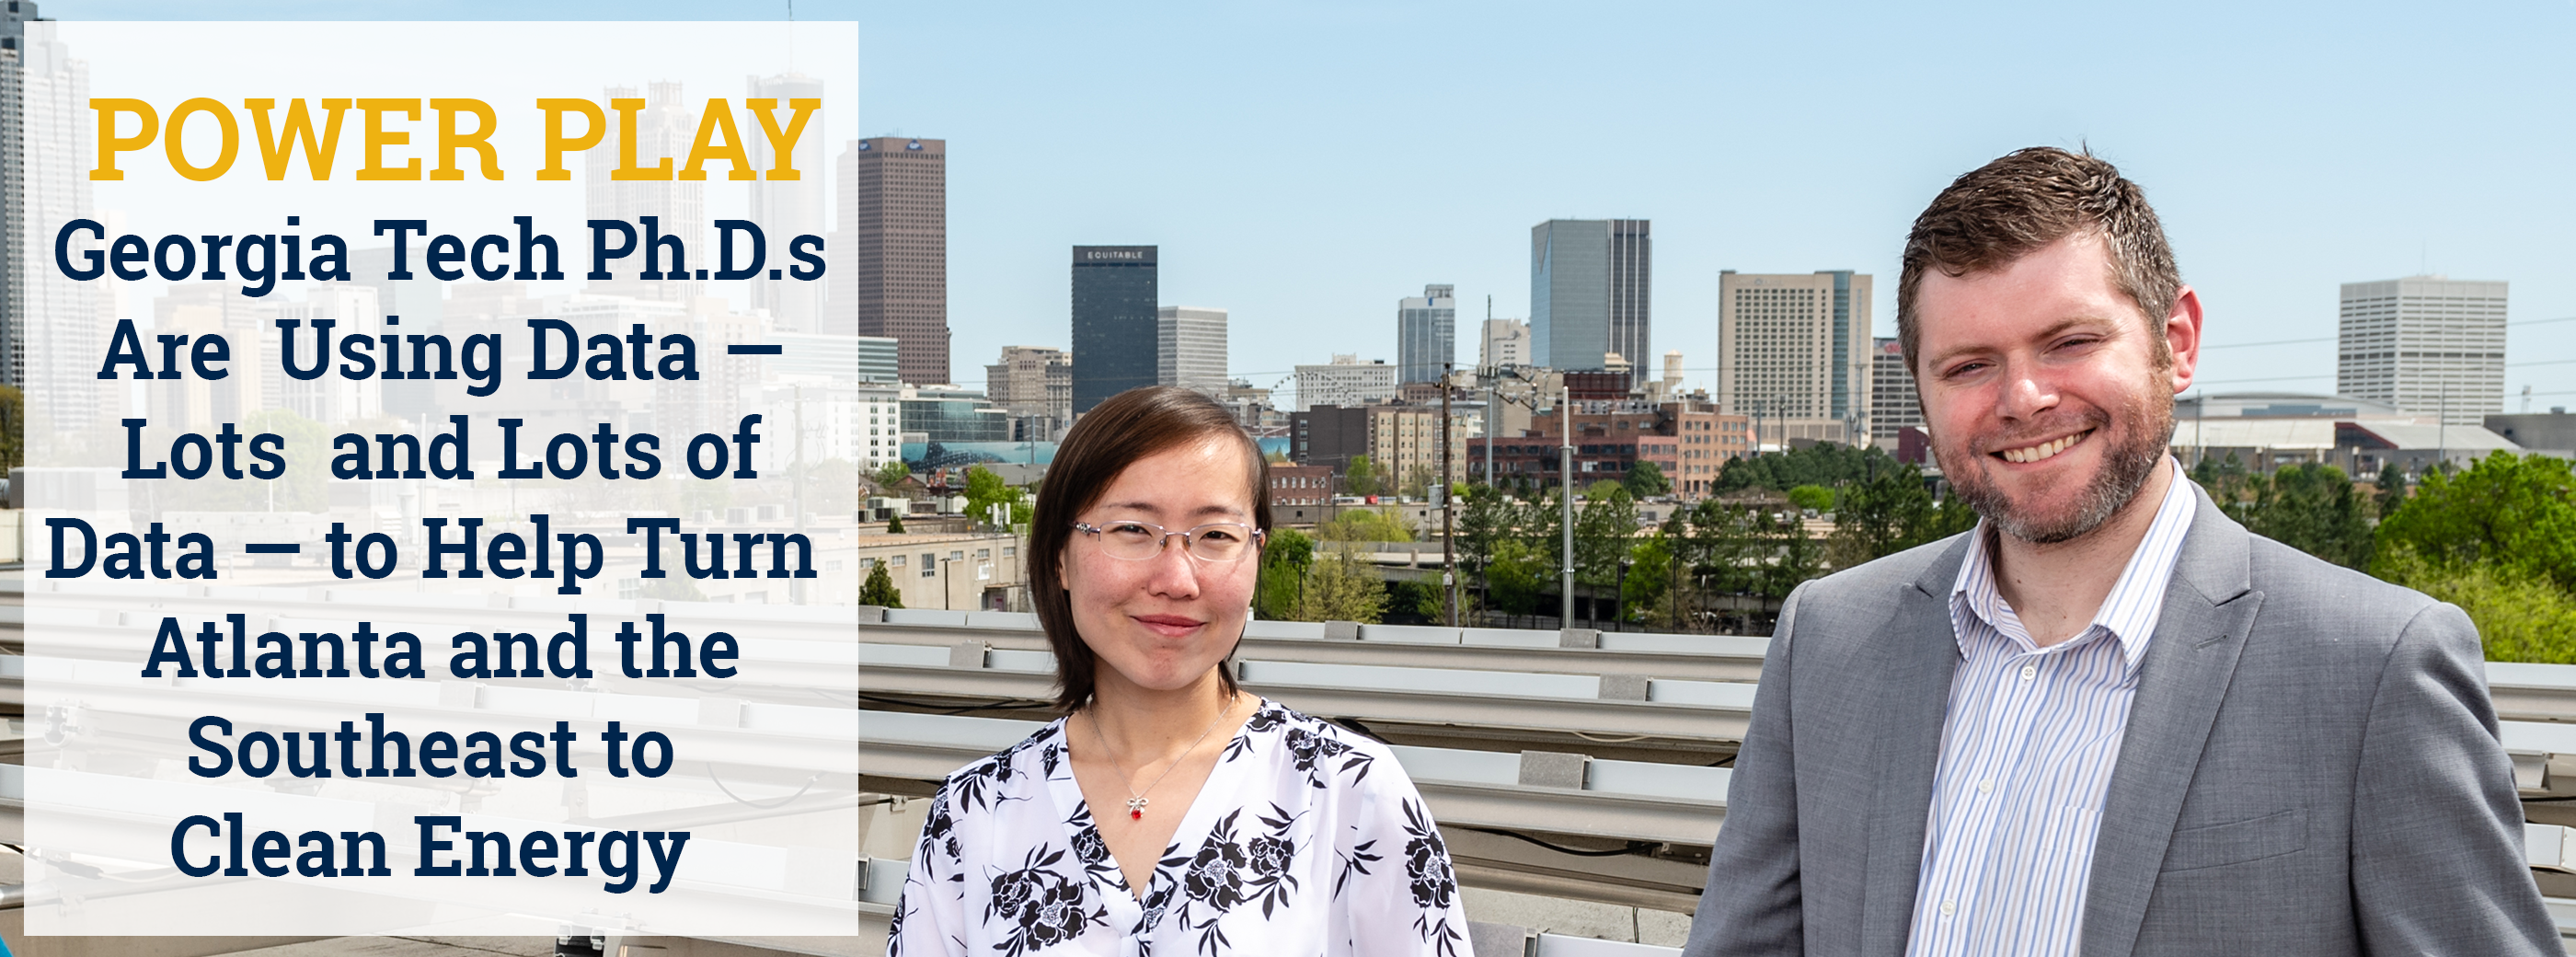 Georgia Tech Ph.D.s Xiaojing Sun and Matt Cox now work at The Greenlink Group, an environmental consulting company.